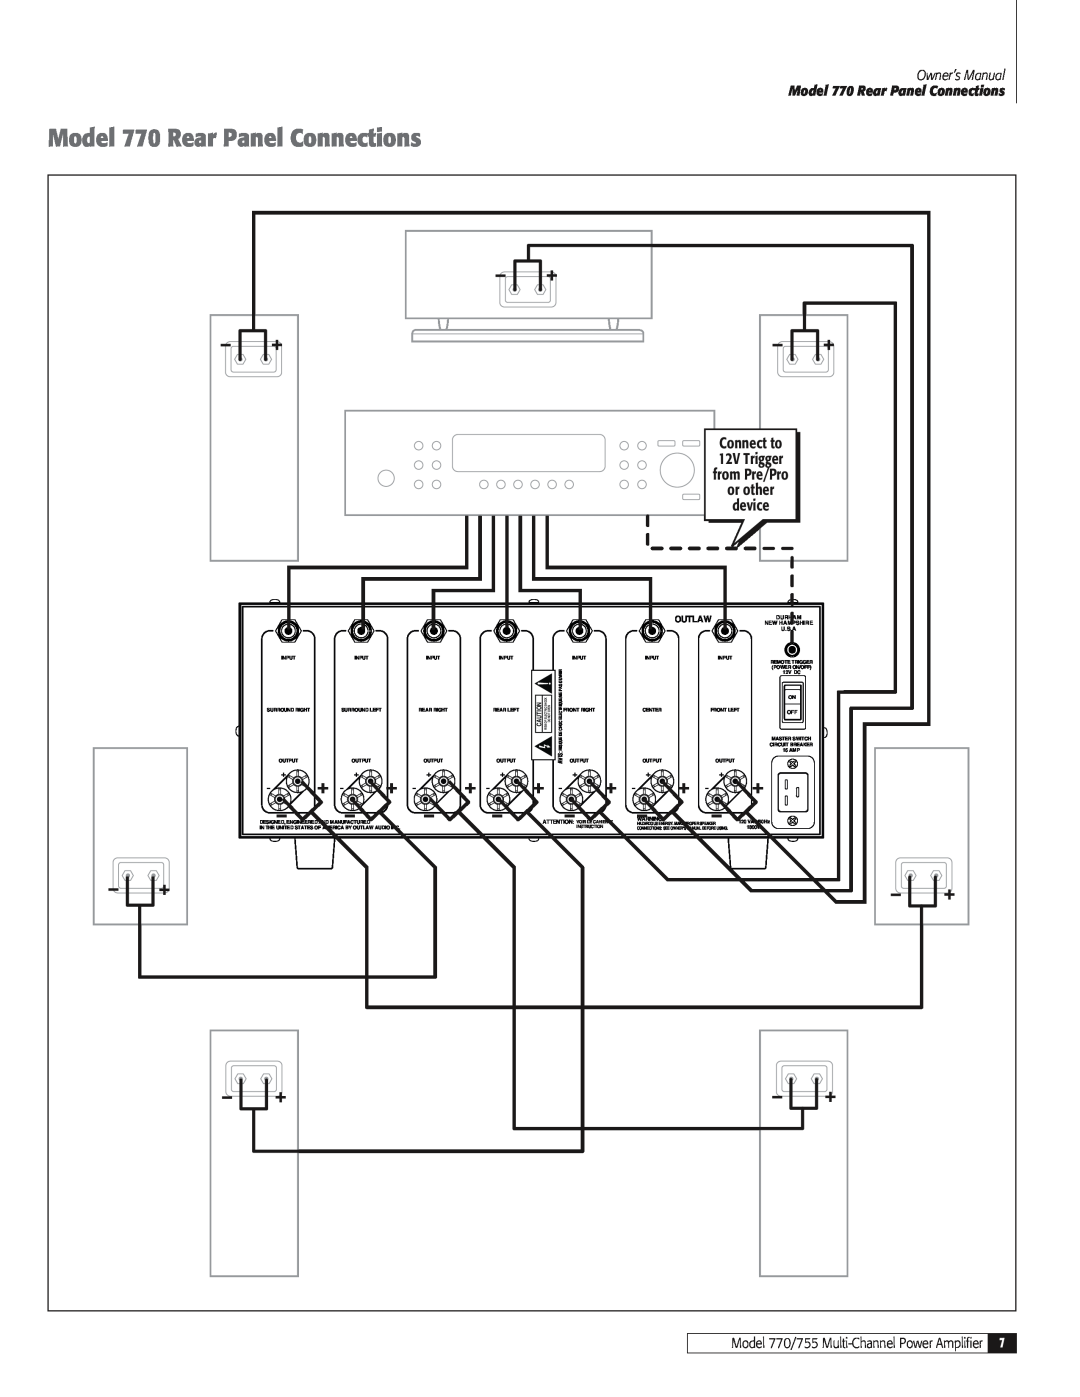 Outlaw Audio owner manual Model 770 Rear Panel Connections, Model 770/755 Multi-ChannelPower Amplifier 